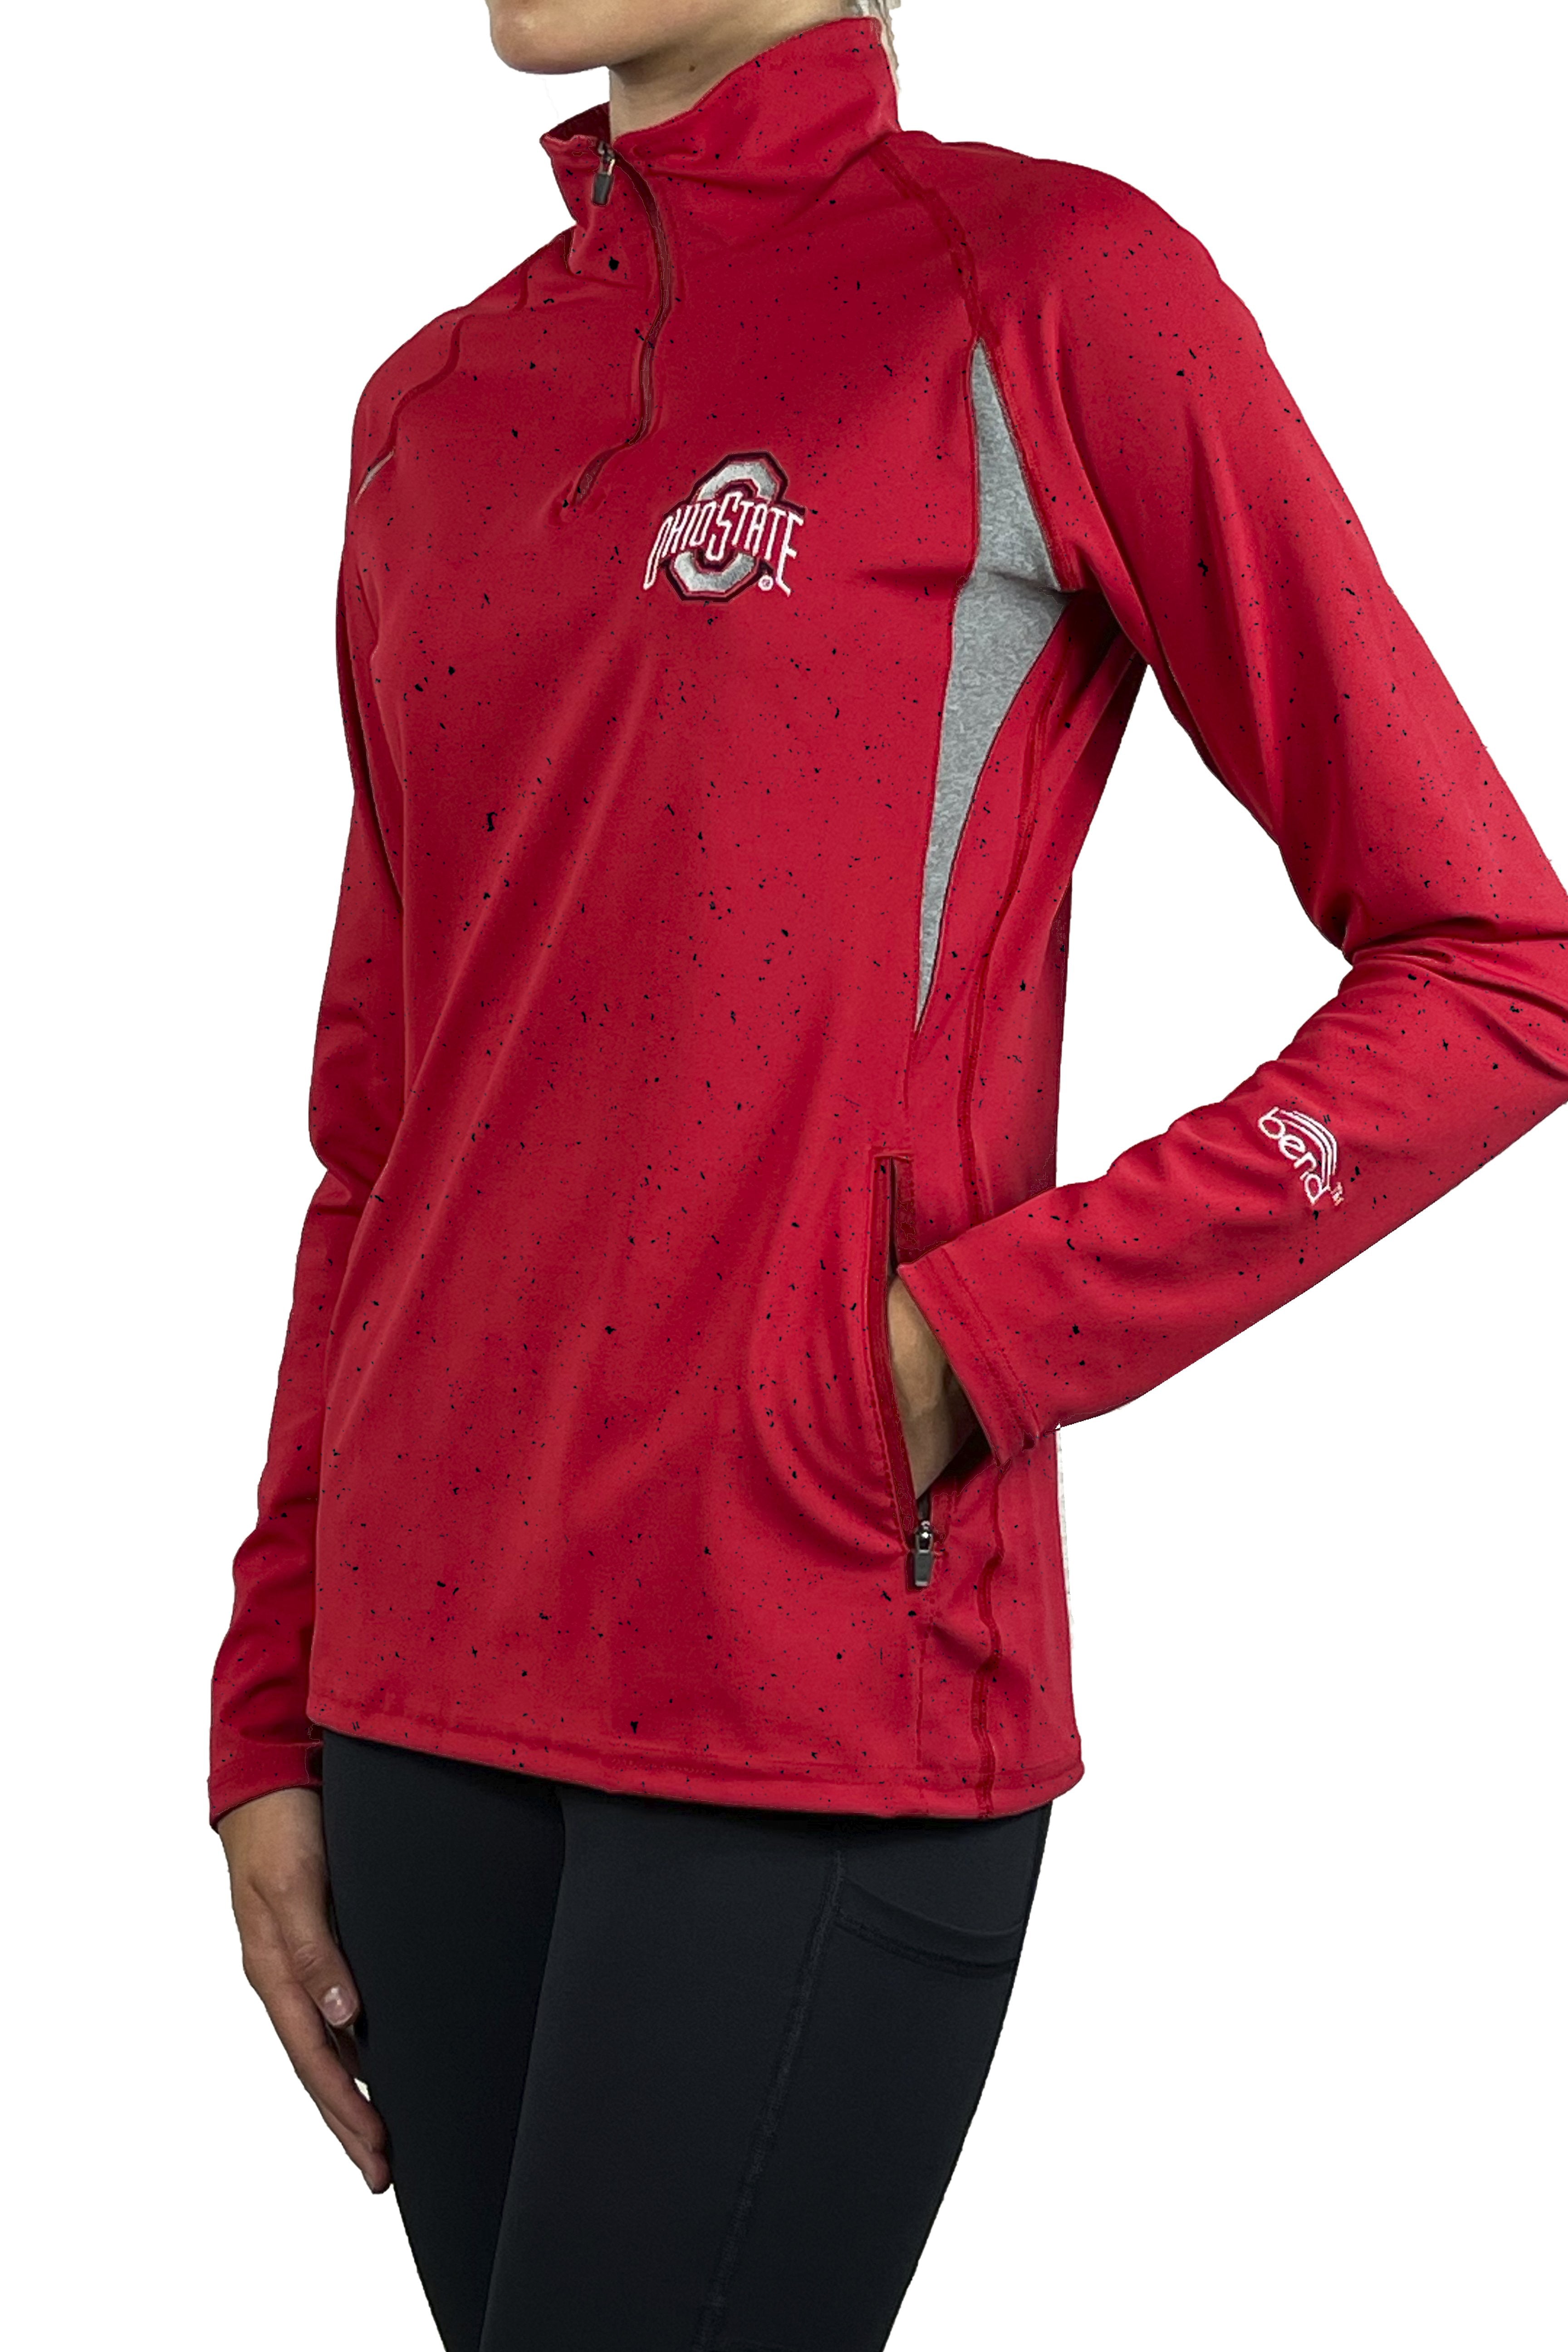 2306 - The Ohio State University "Noise" 1/4 Zip Pullover/Red